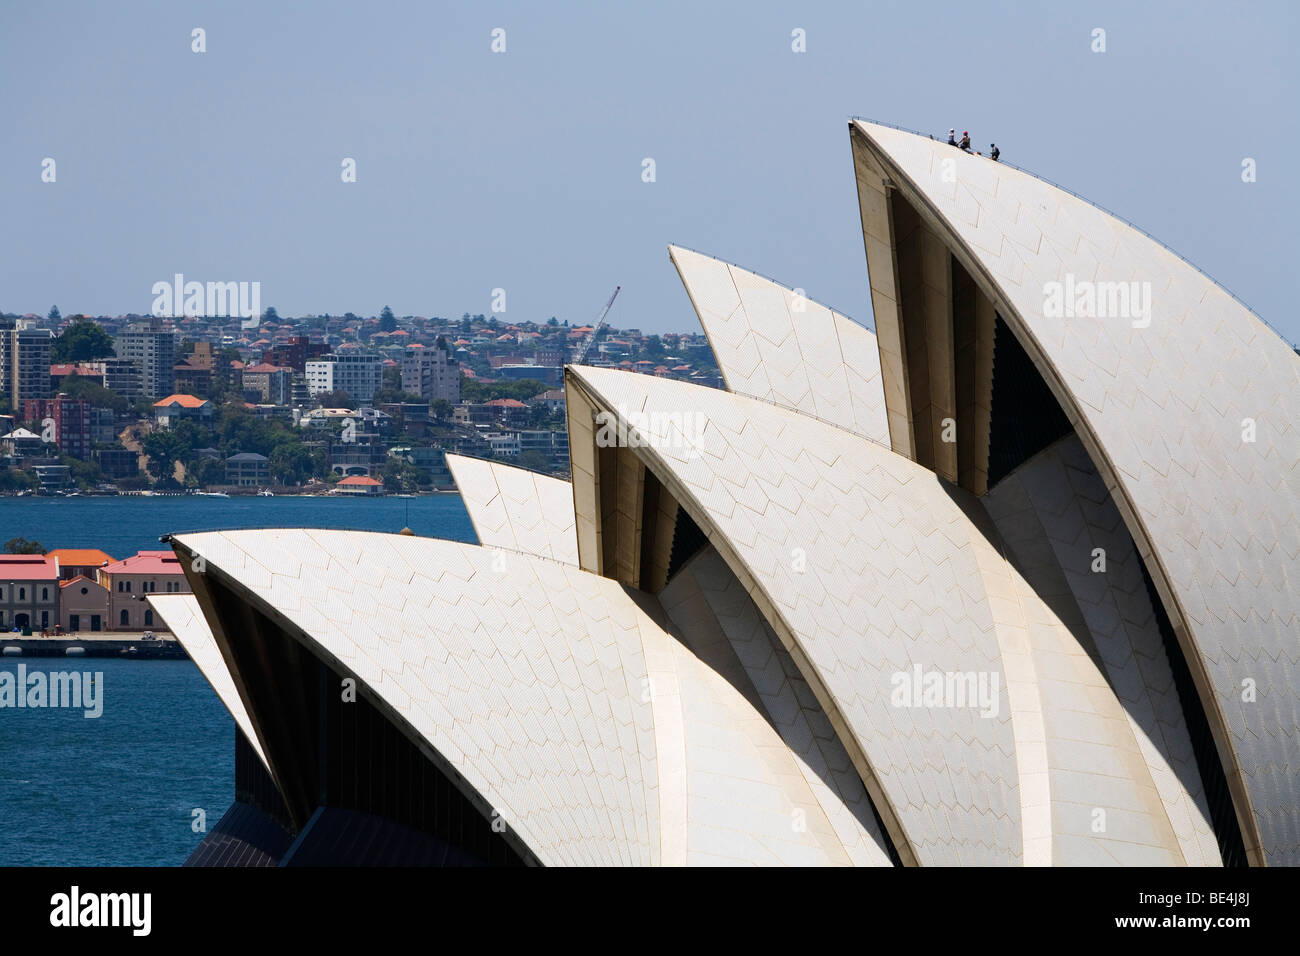 The iconic arches the Sydney Opera House. Circular Quay, Sydney, New South Wales, AUSTRALIA Stock Photo